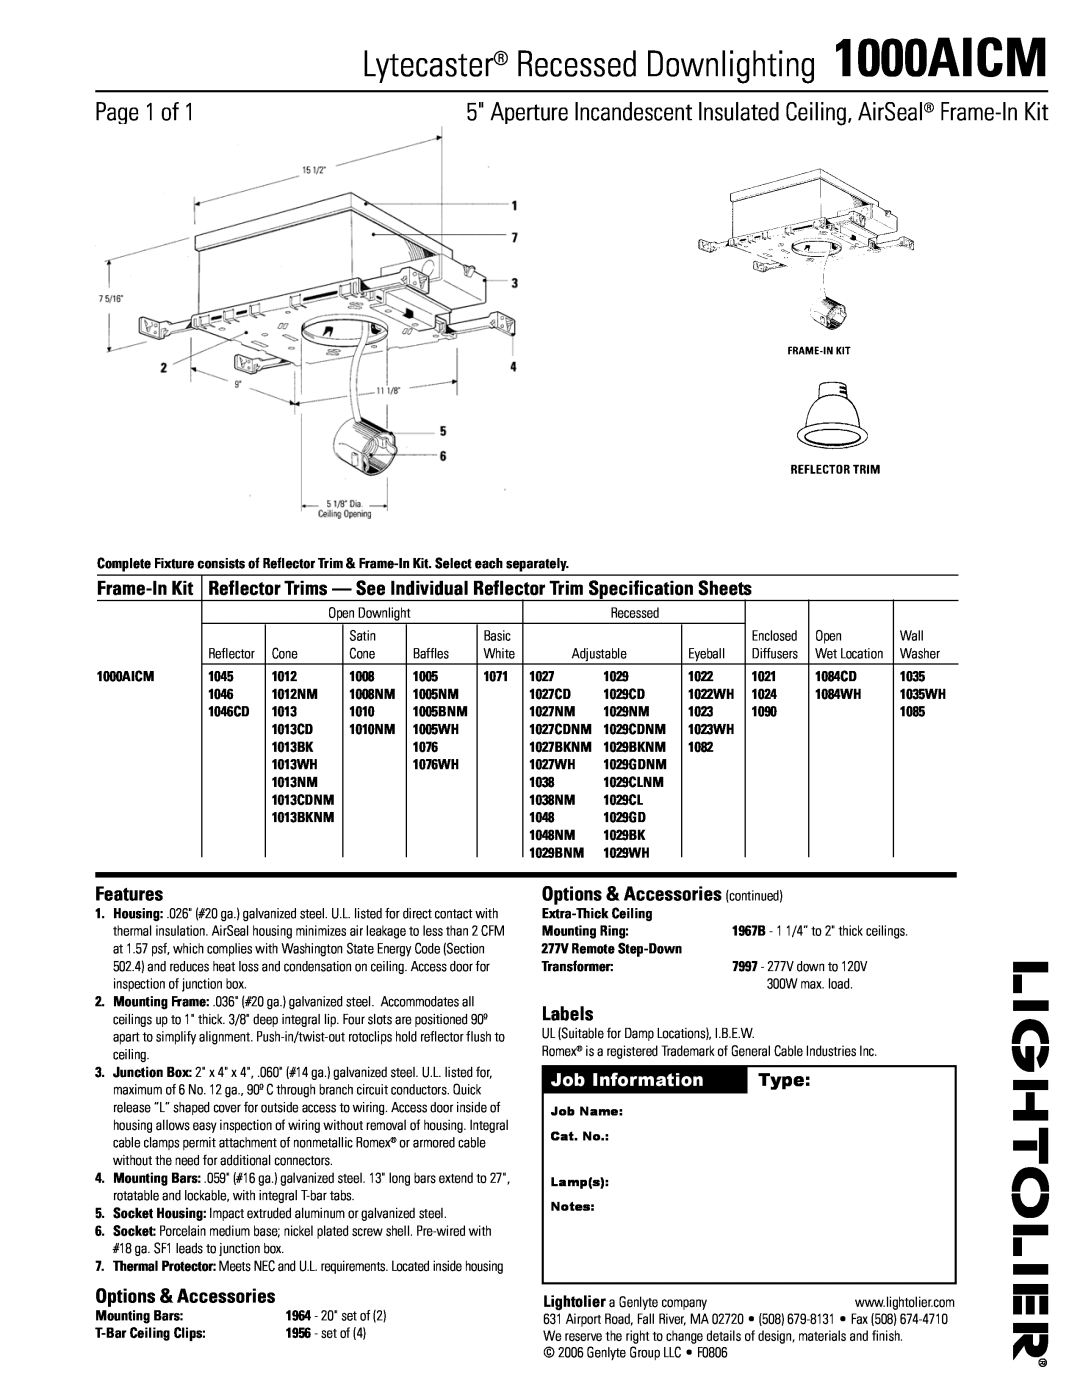 Lightolier specifications Lytecaster Recessed Downlighting 1000AICM, Page 1 of, Features, Options & Accessories, Labels 